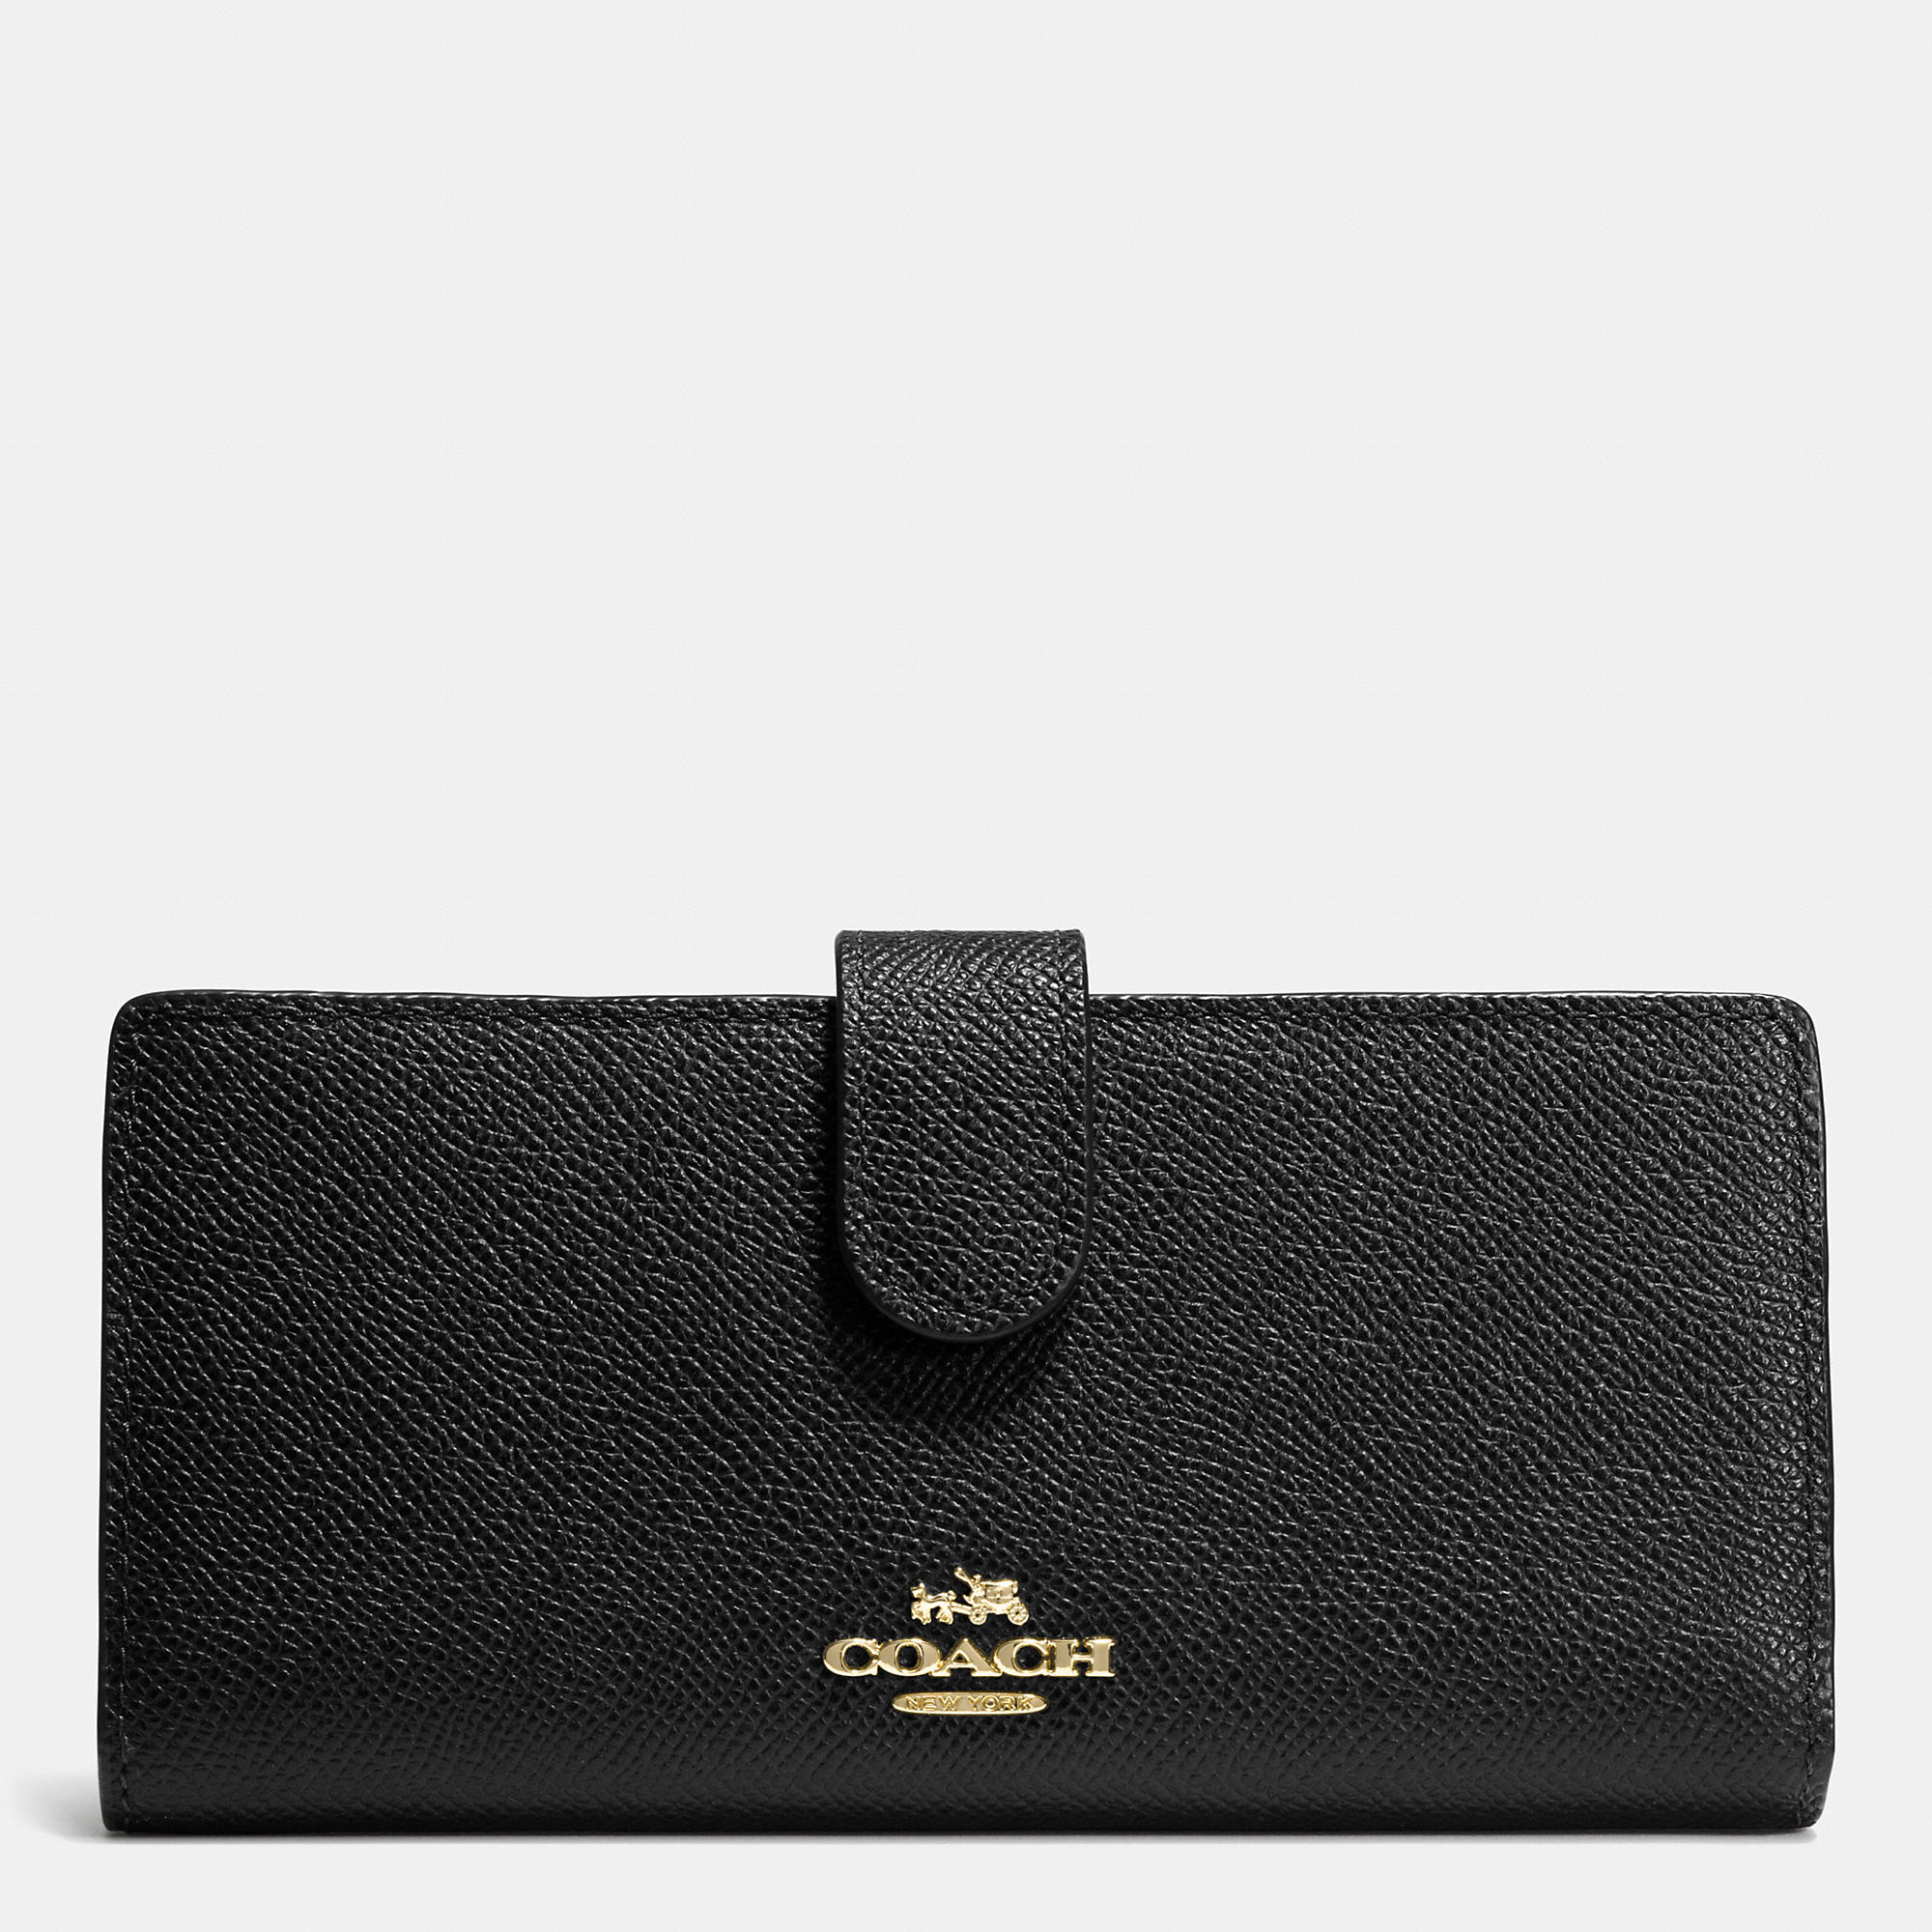 COACH Skinny Wallet In Embossed Textured Leather in Black - Lyst